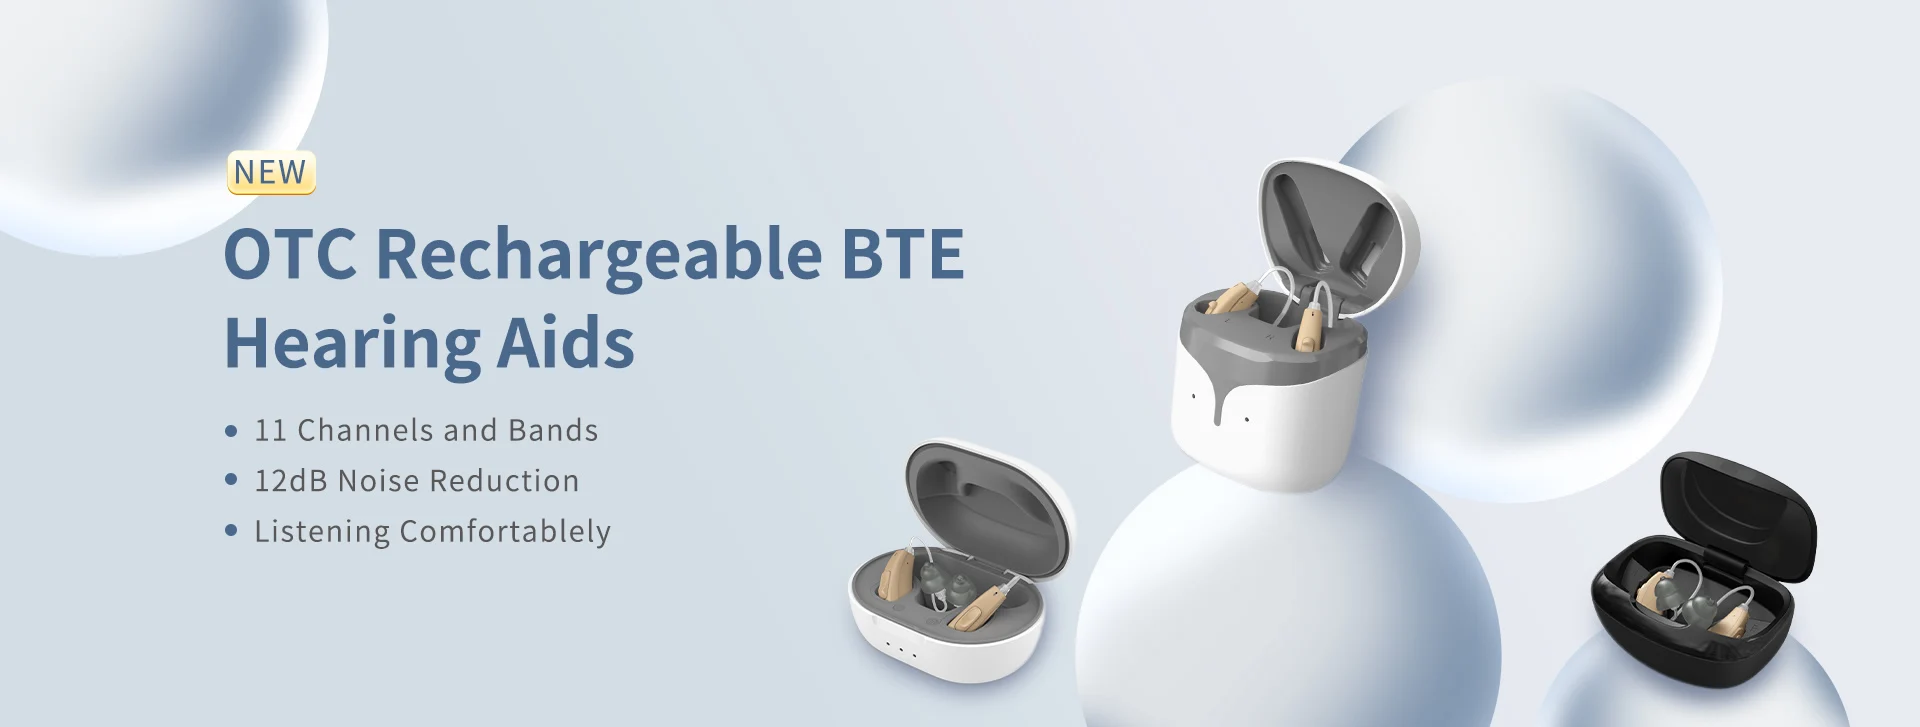 OTC Rechargeable BTE Hearing Aids